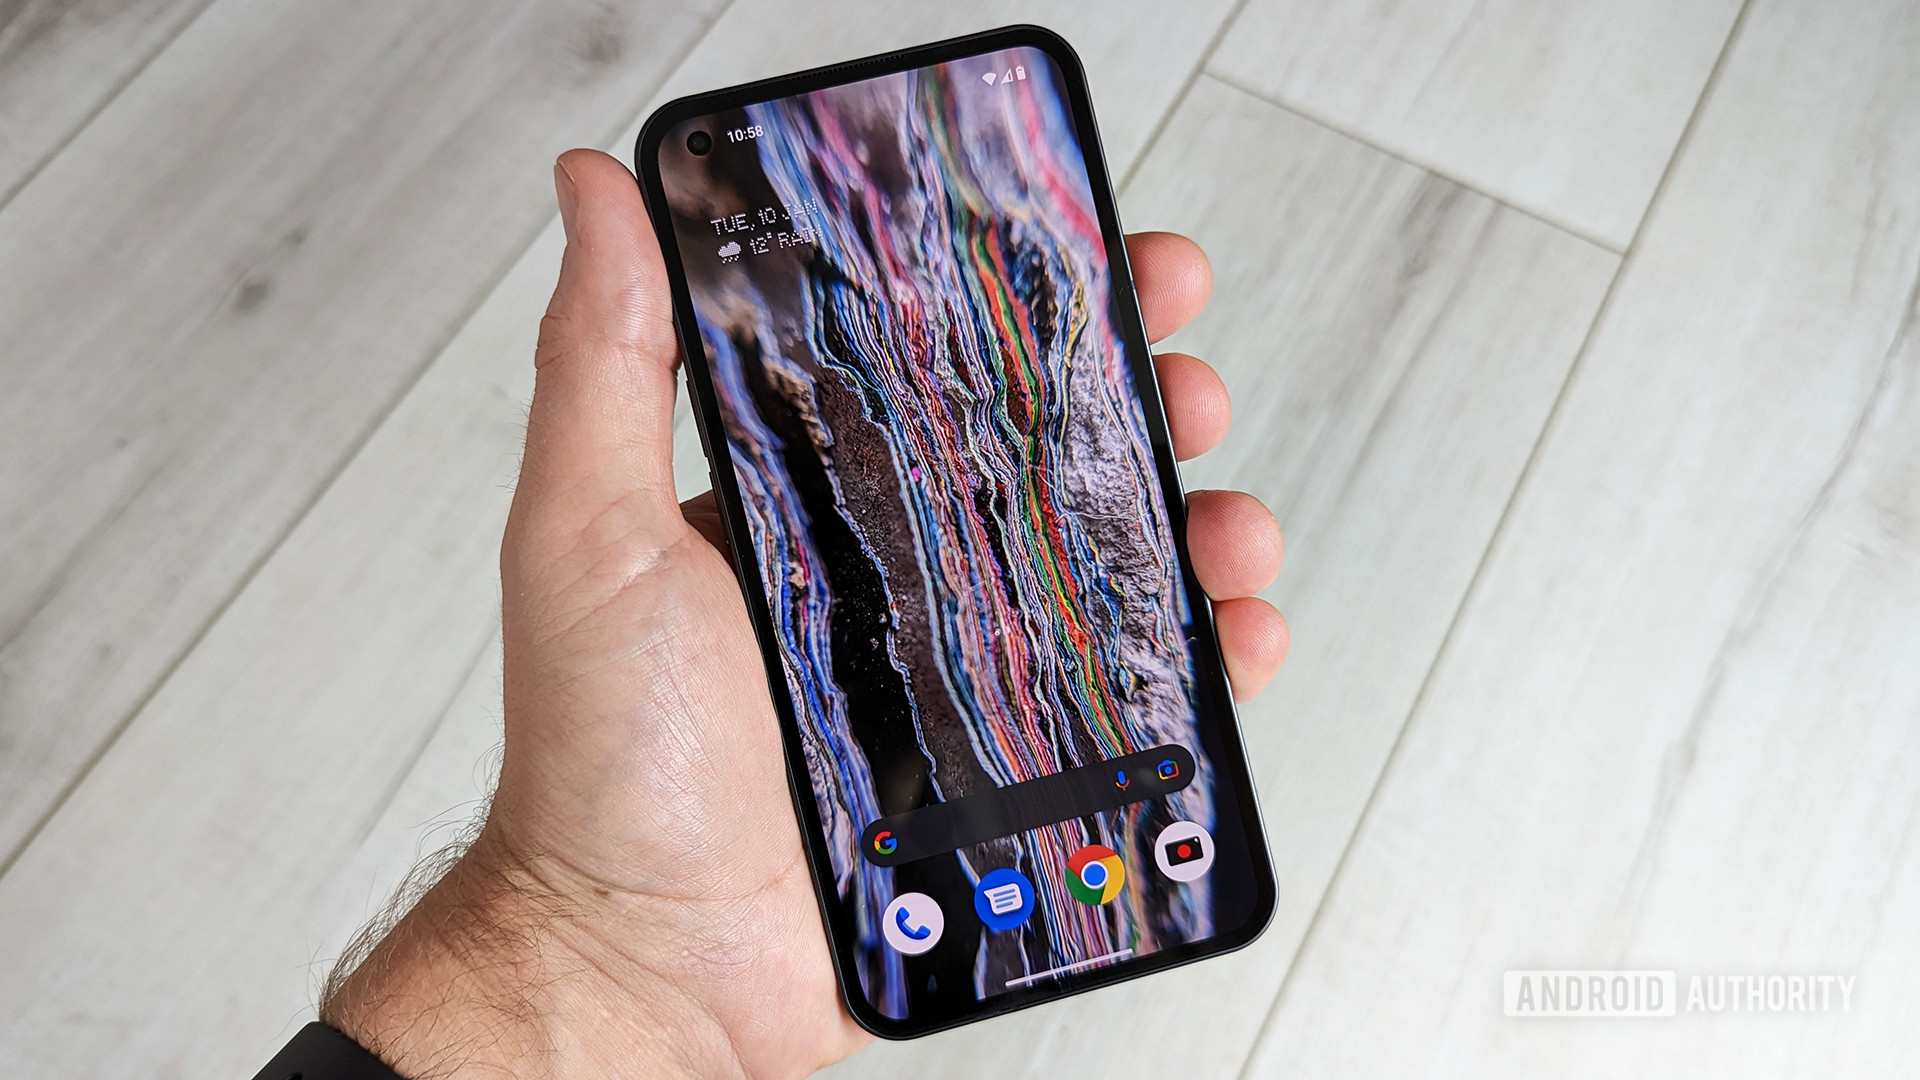 Wallpaper Wednesday: Android wallpapers 2023-01-11 - Android Authority